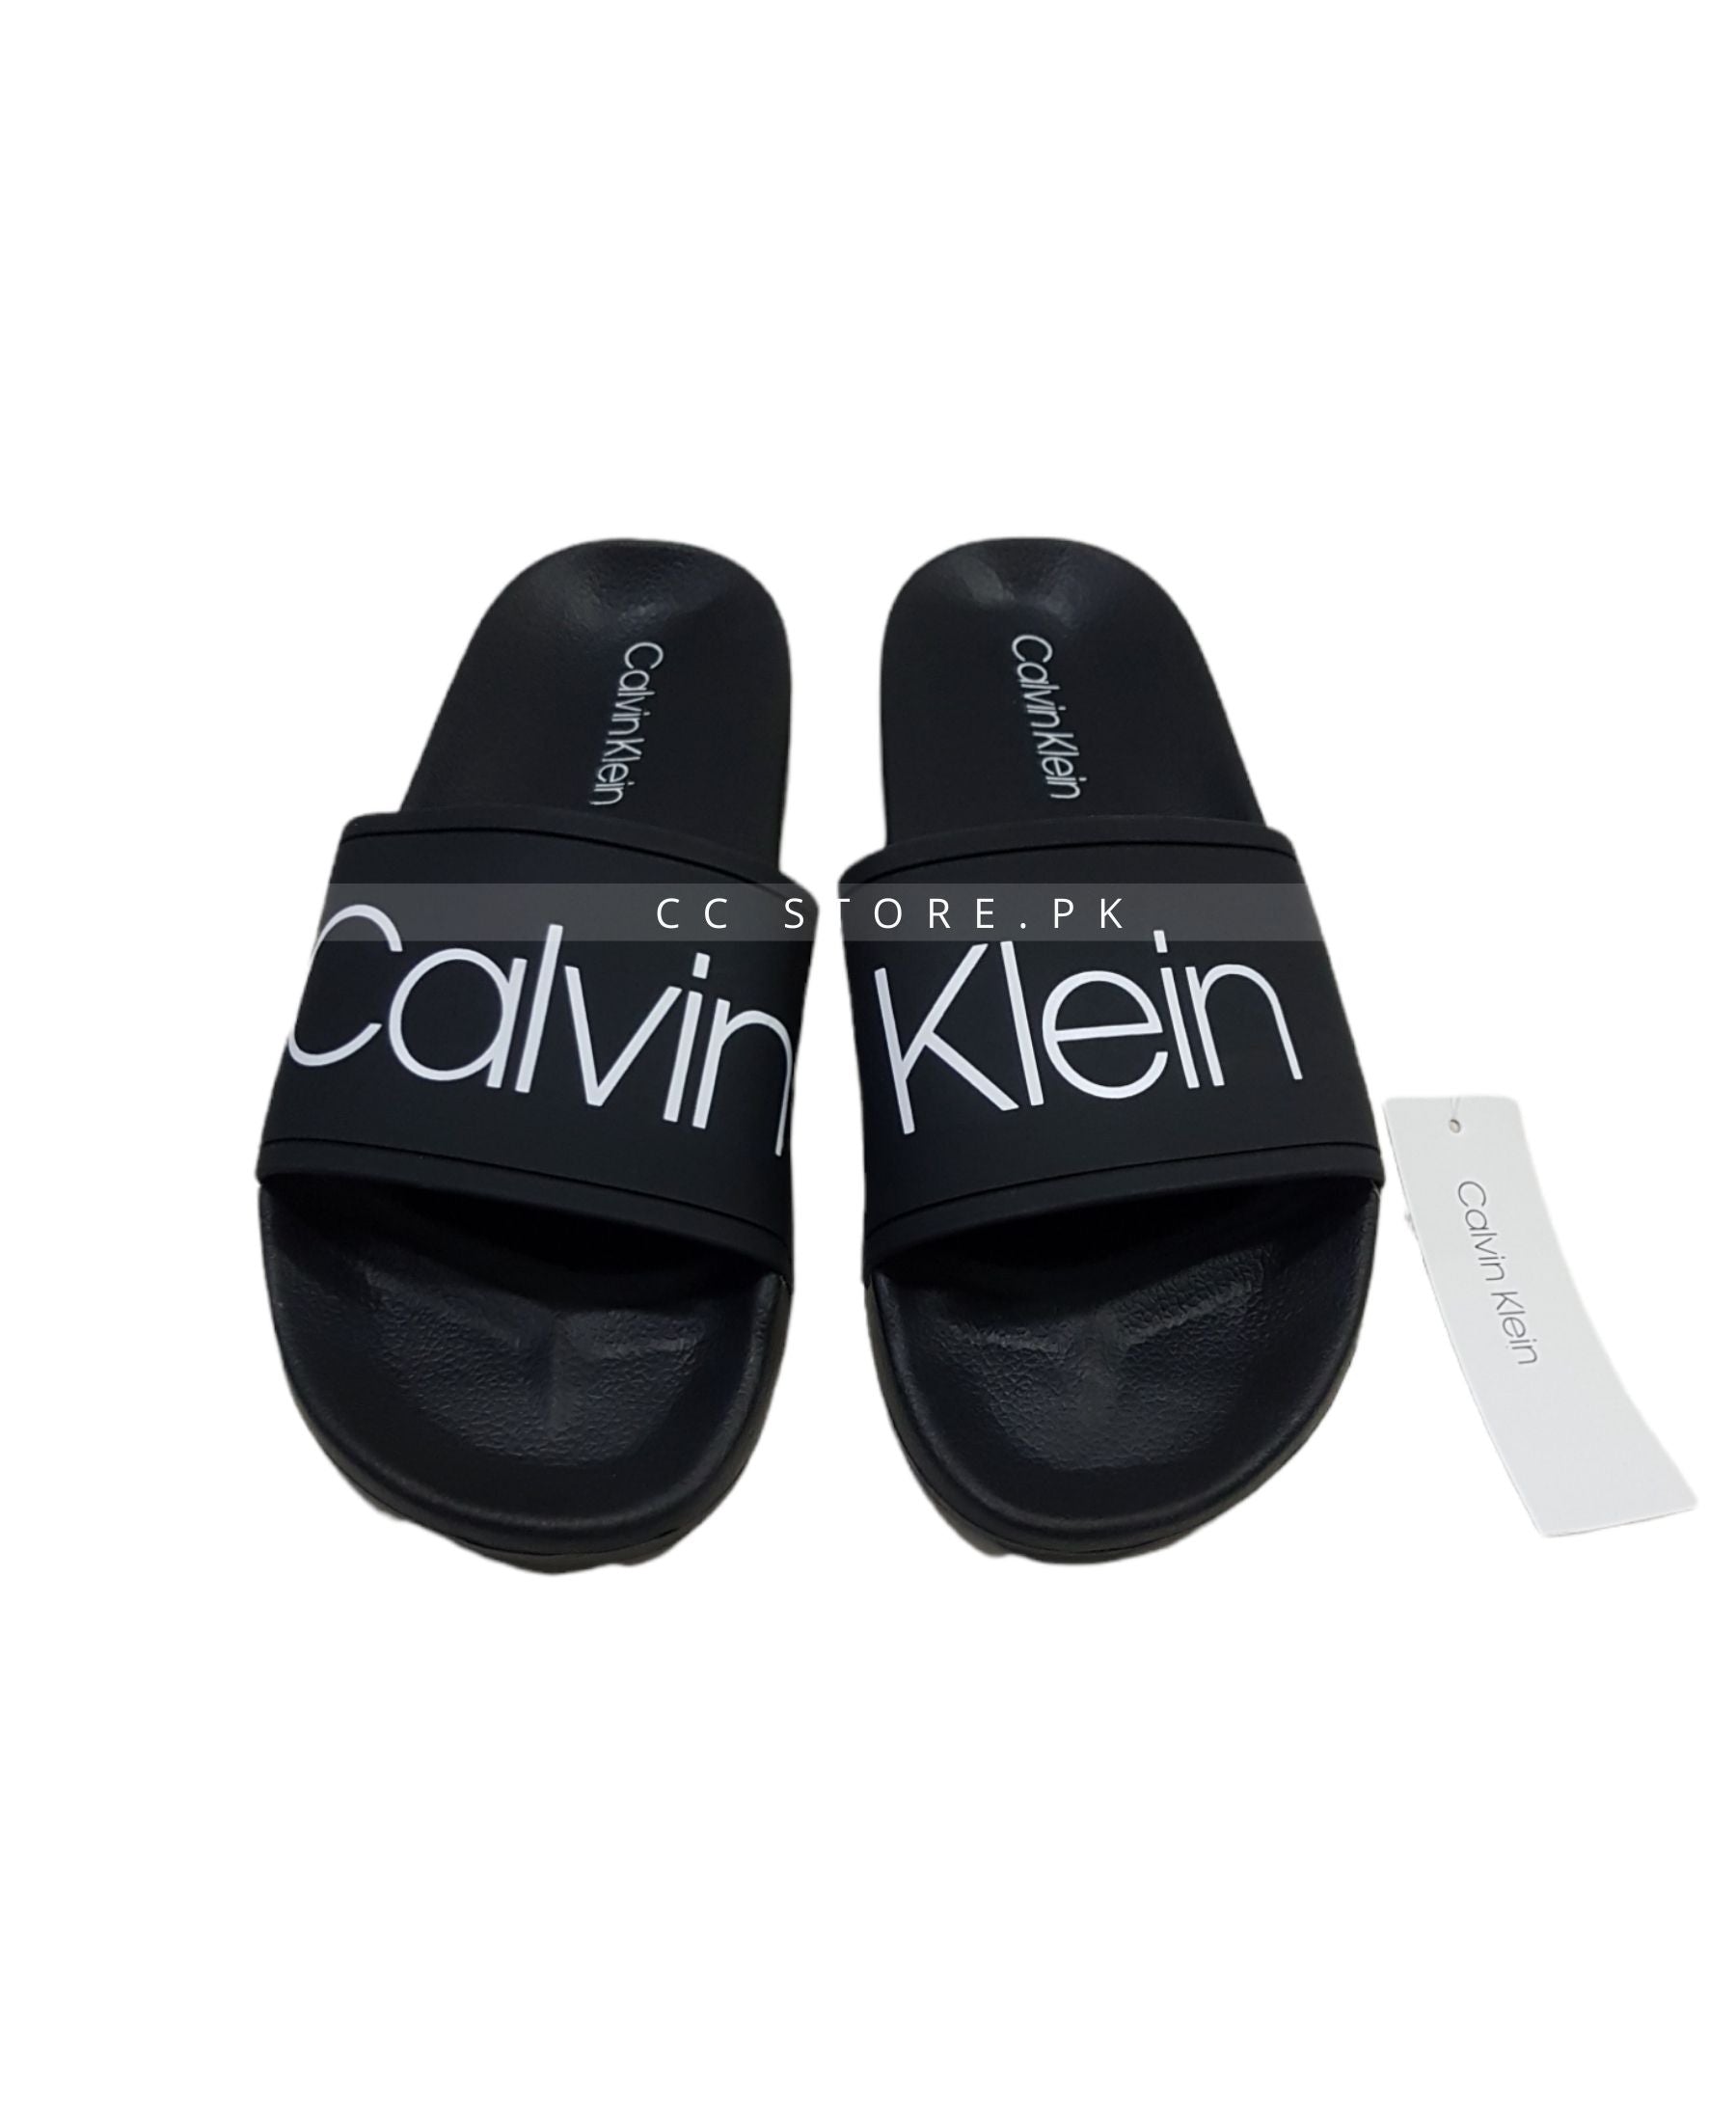 CK Black Slides – Clothing Call - Your Multi Brand Store.